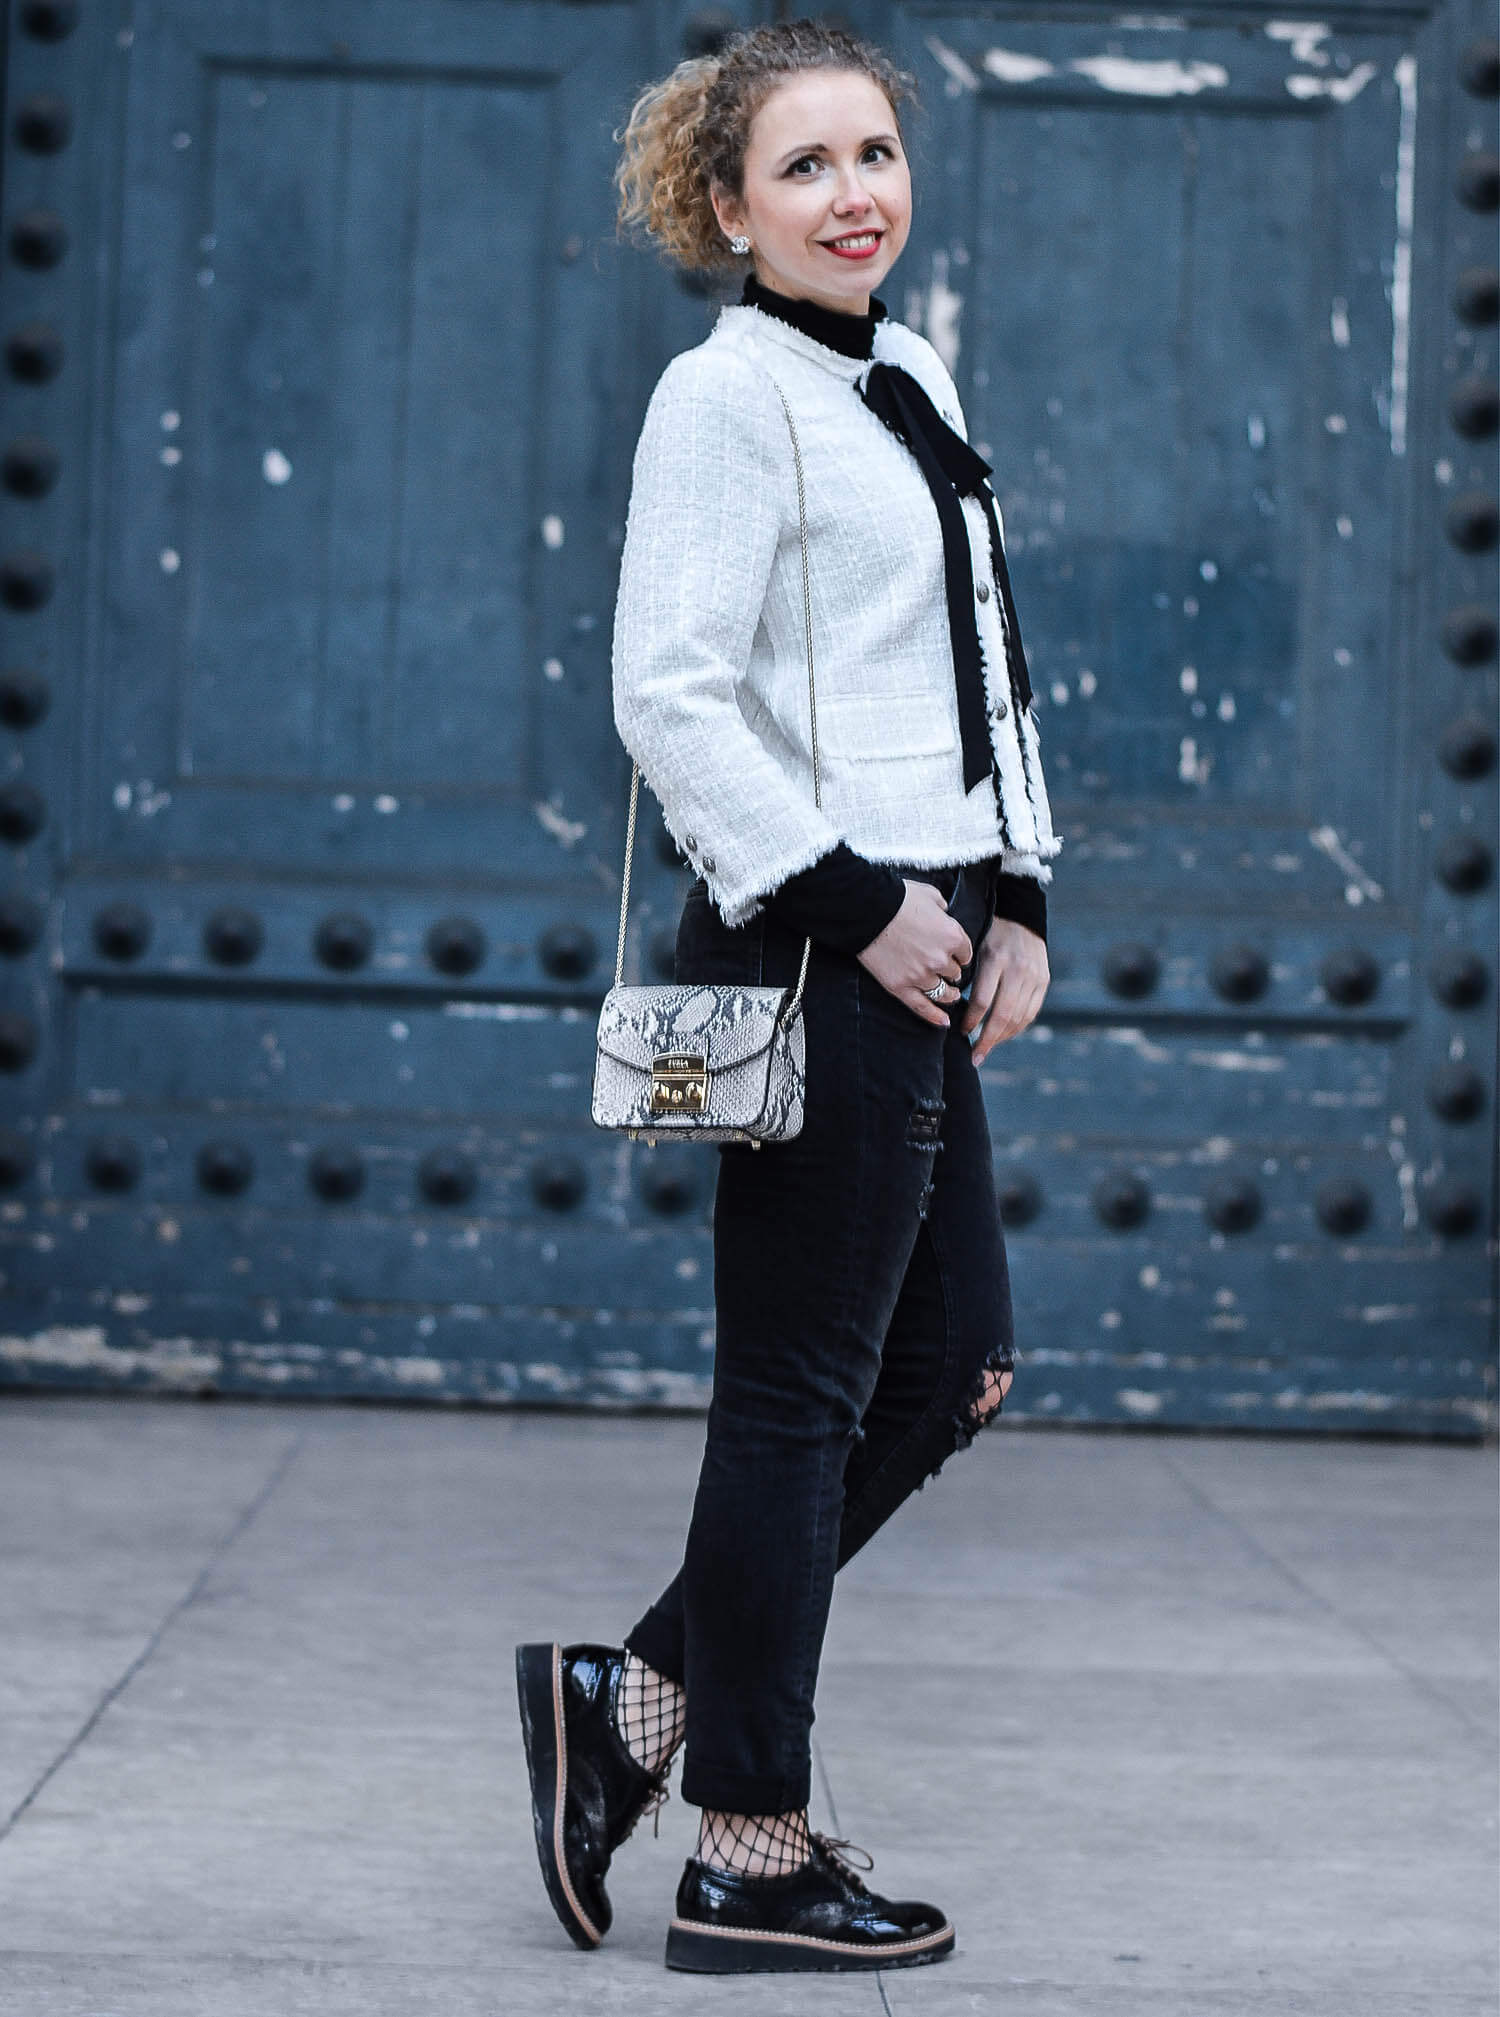 Kationette-fashionblog-nrw-Outfit-Zara-Tweed-Jacket-Ripped-Jeans-Chanel-Jewelry-Paris-streetstyle